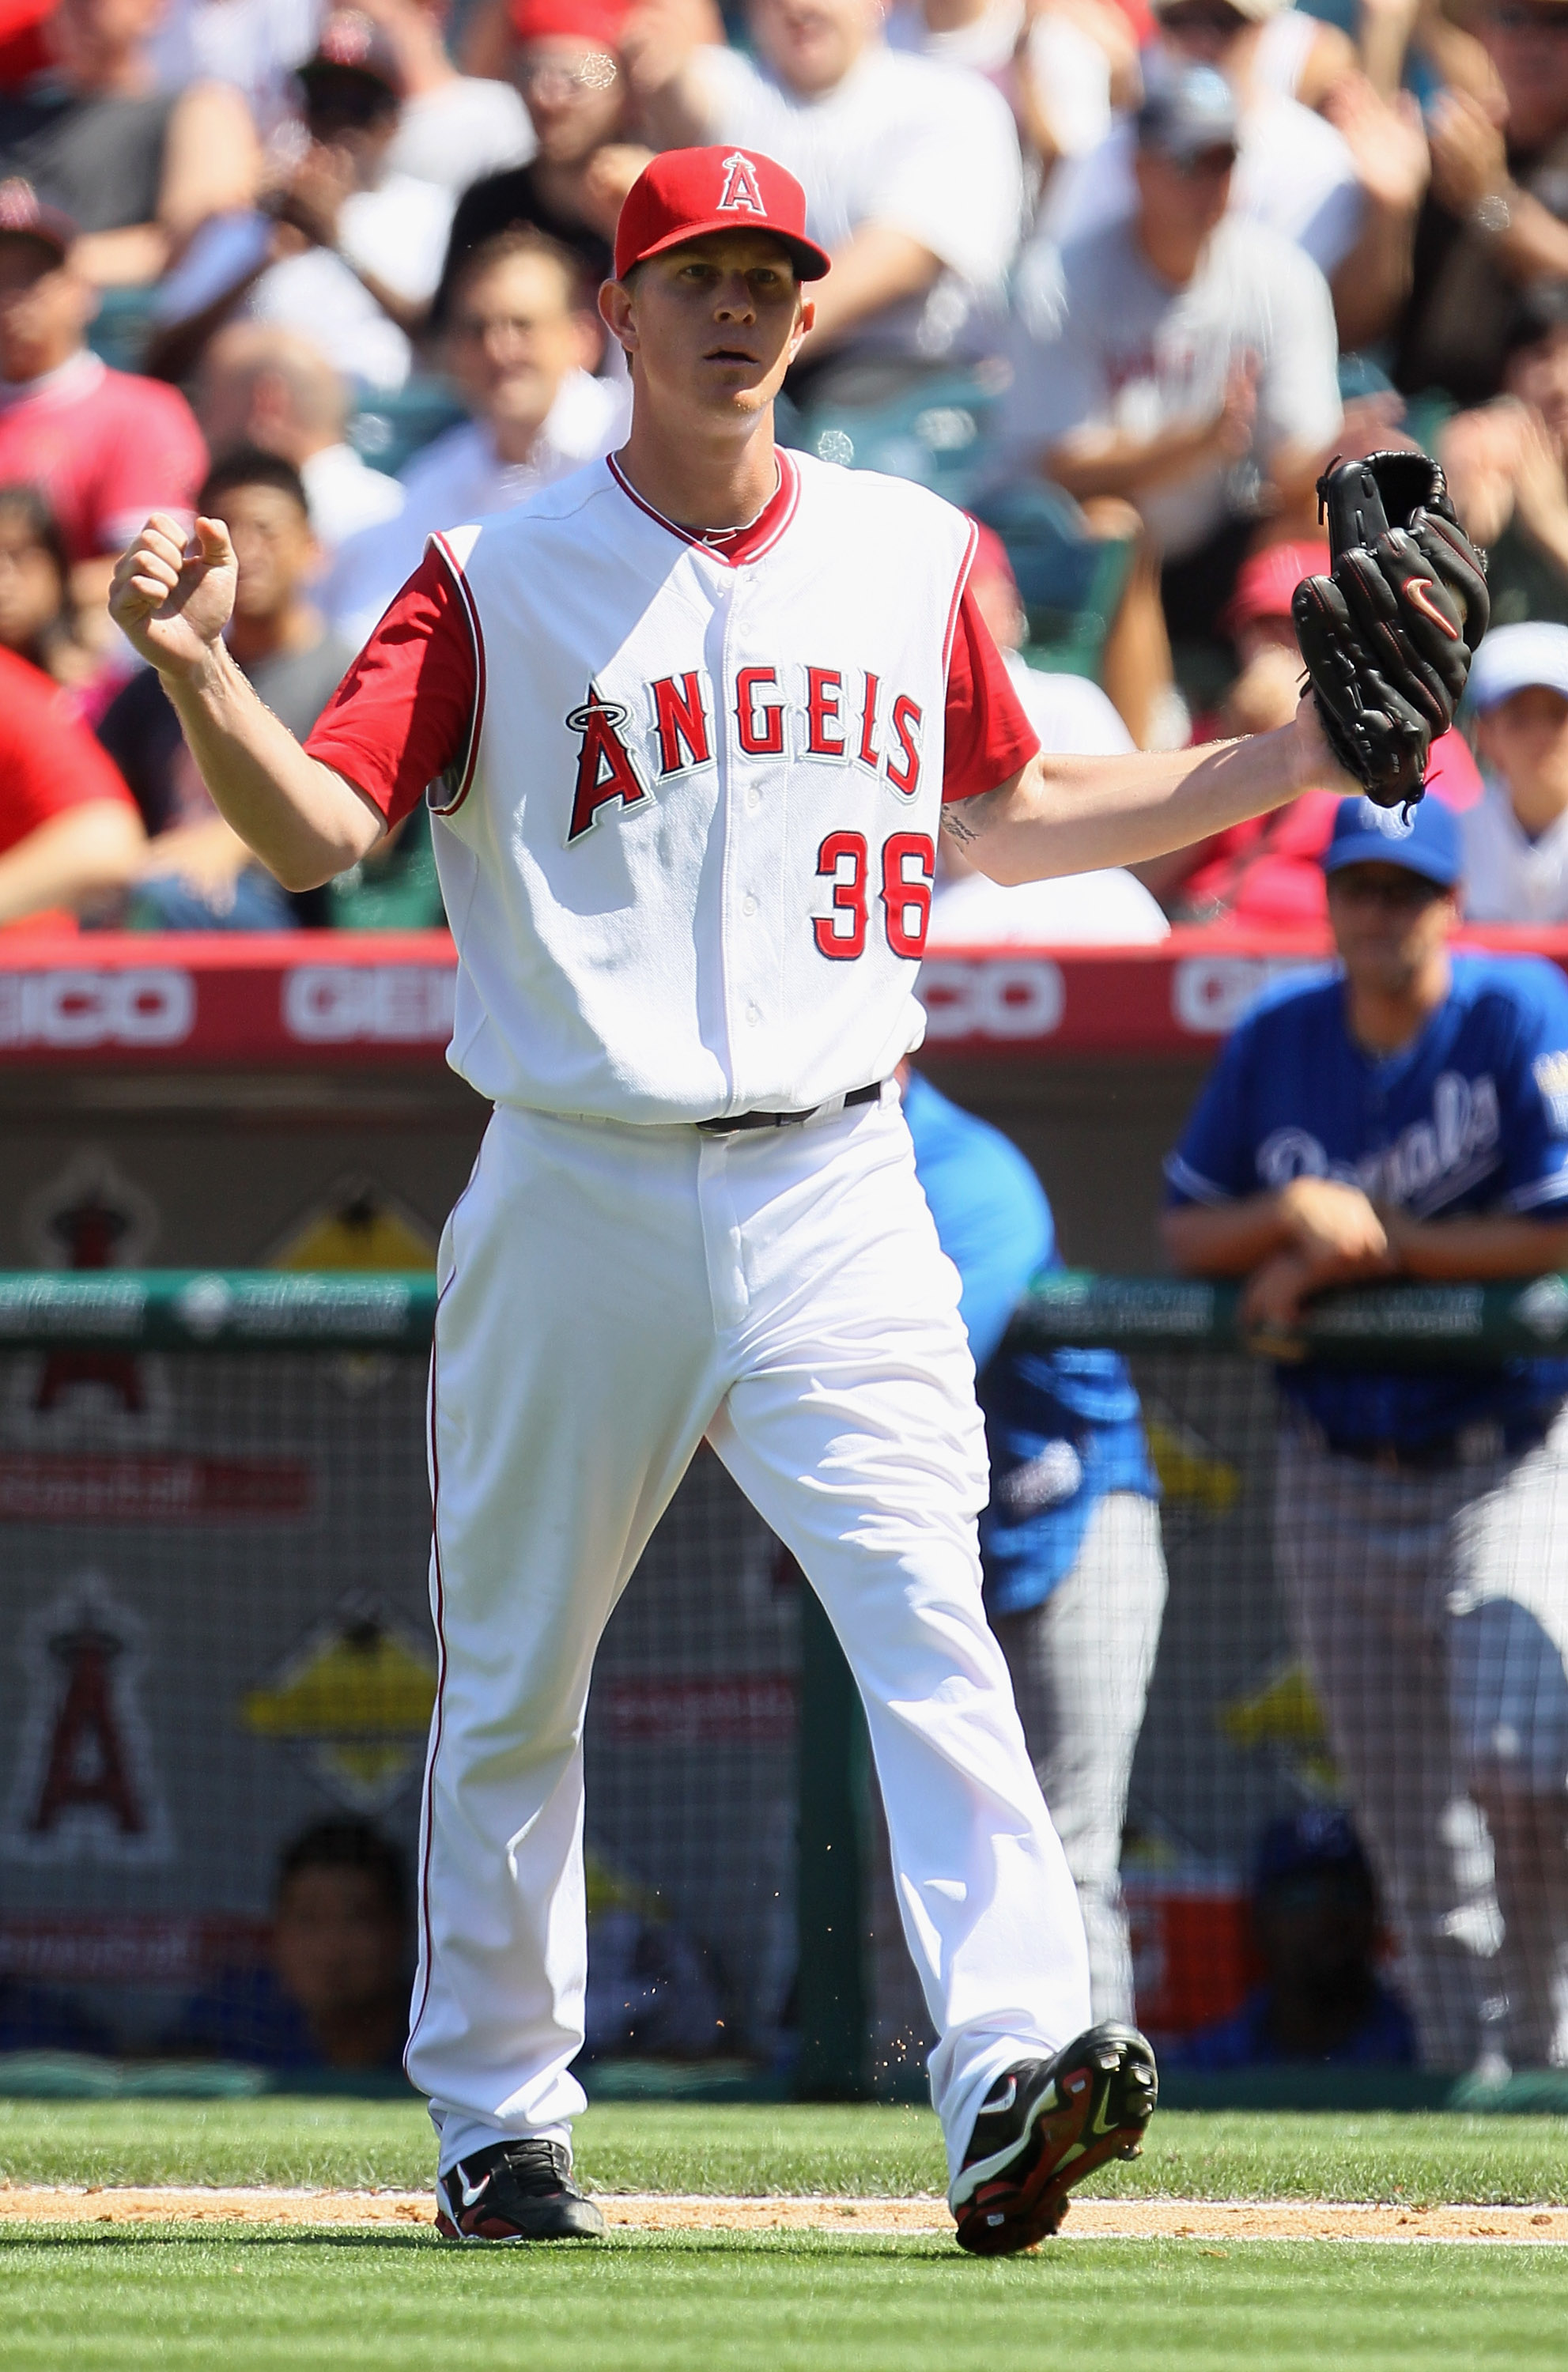 ANAHEIM, CA - AUGUST 11:  Pitcher Jered Weaver #36 of the Los Angeles Angels of Anaheim pumps his fist after getting Alex Gordon #4 of the Kansas City Royals to ground out in the eighth inning at Angel Stadium on August 11, 2010 in Anaheim, California. Th